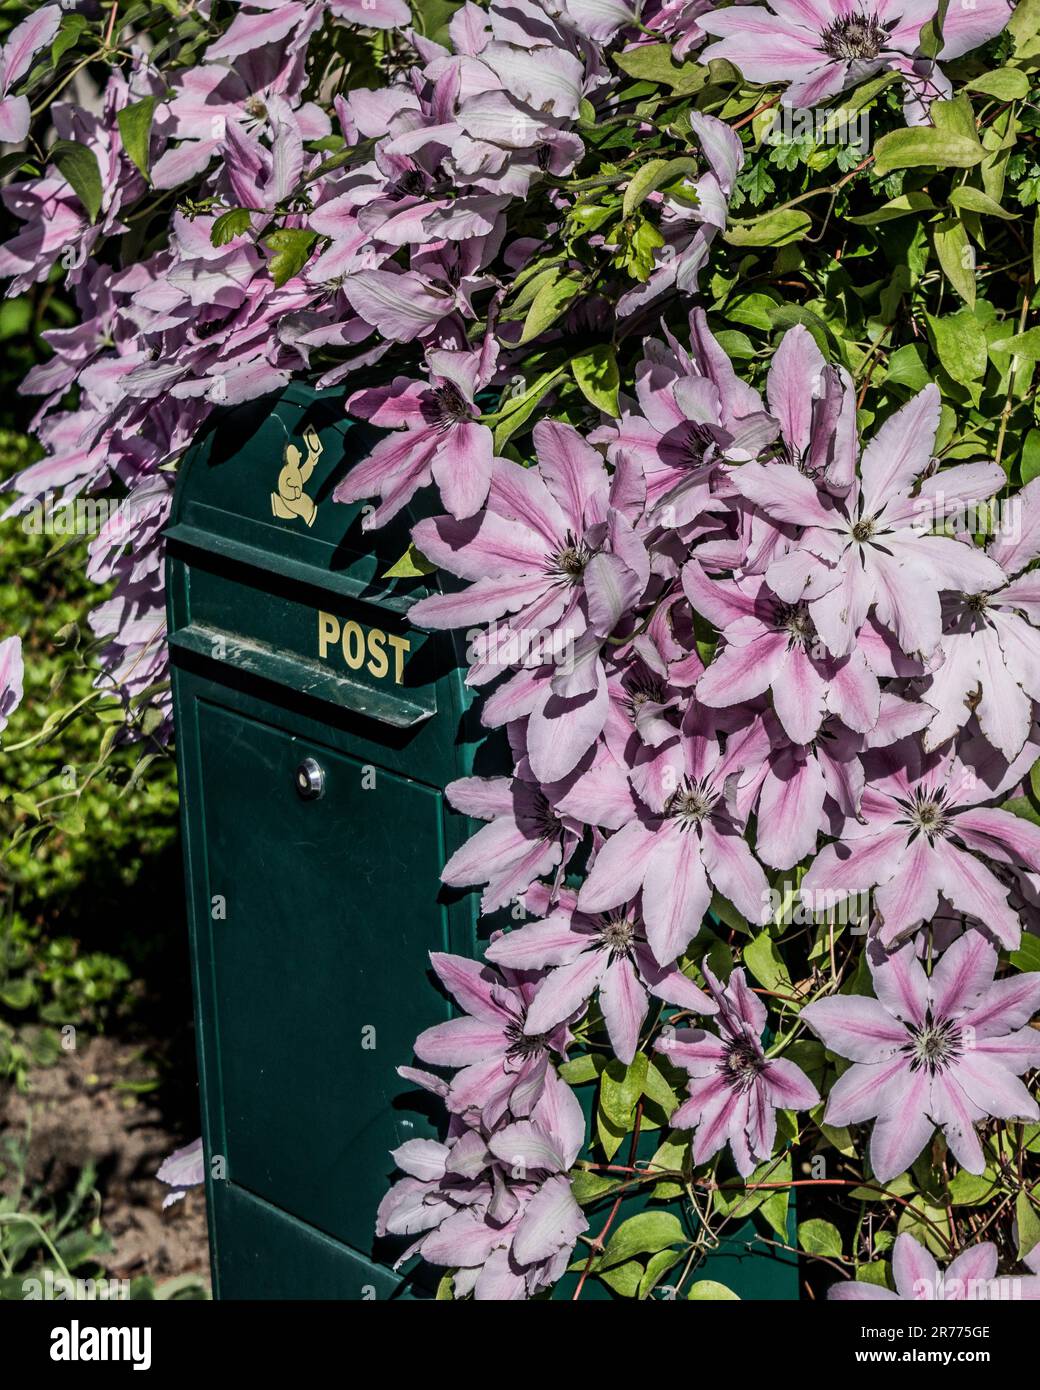 An outdoor post box adorned with vibrant florals and lush greenery in the background Stock Photo